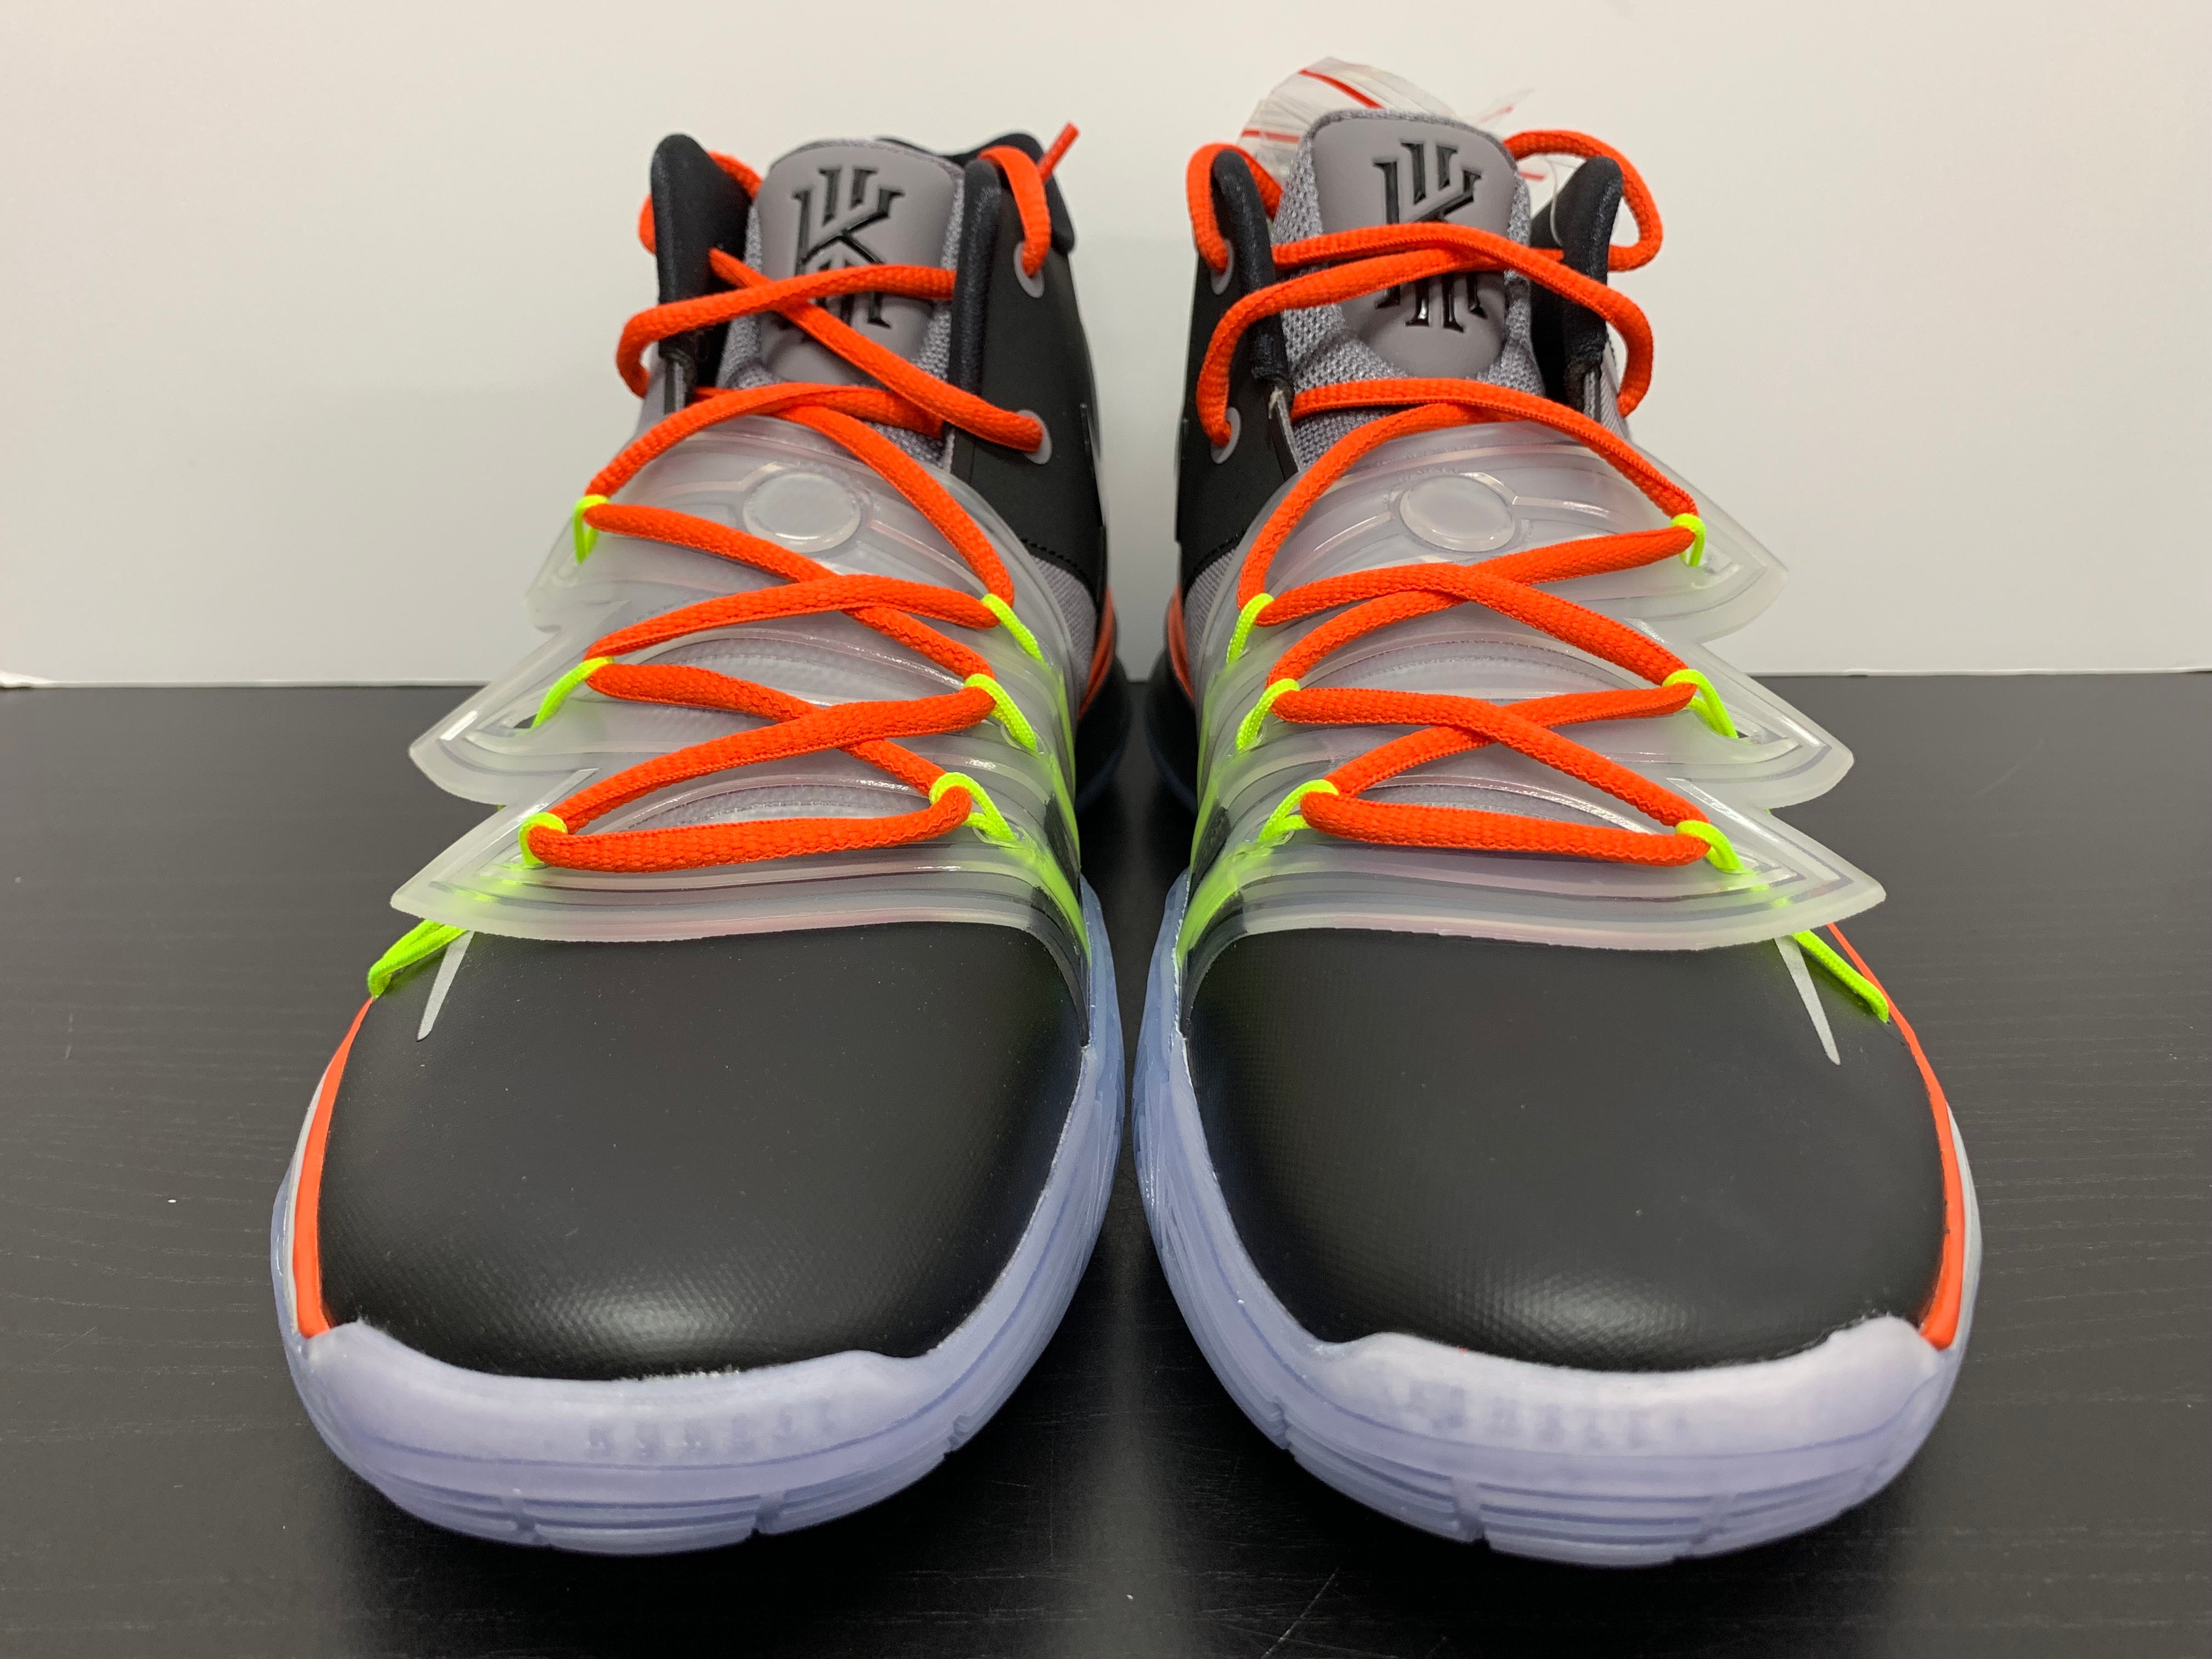 Limited Edition ROKIT x Nike Kyrie 5 Welcome Home Release